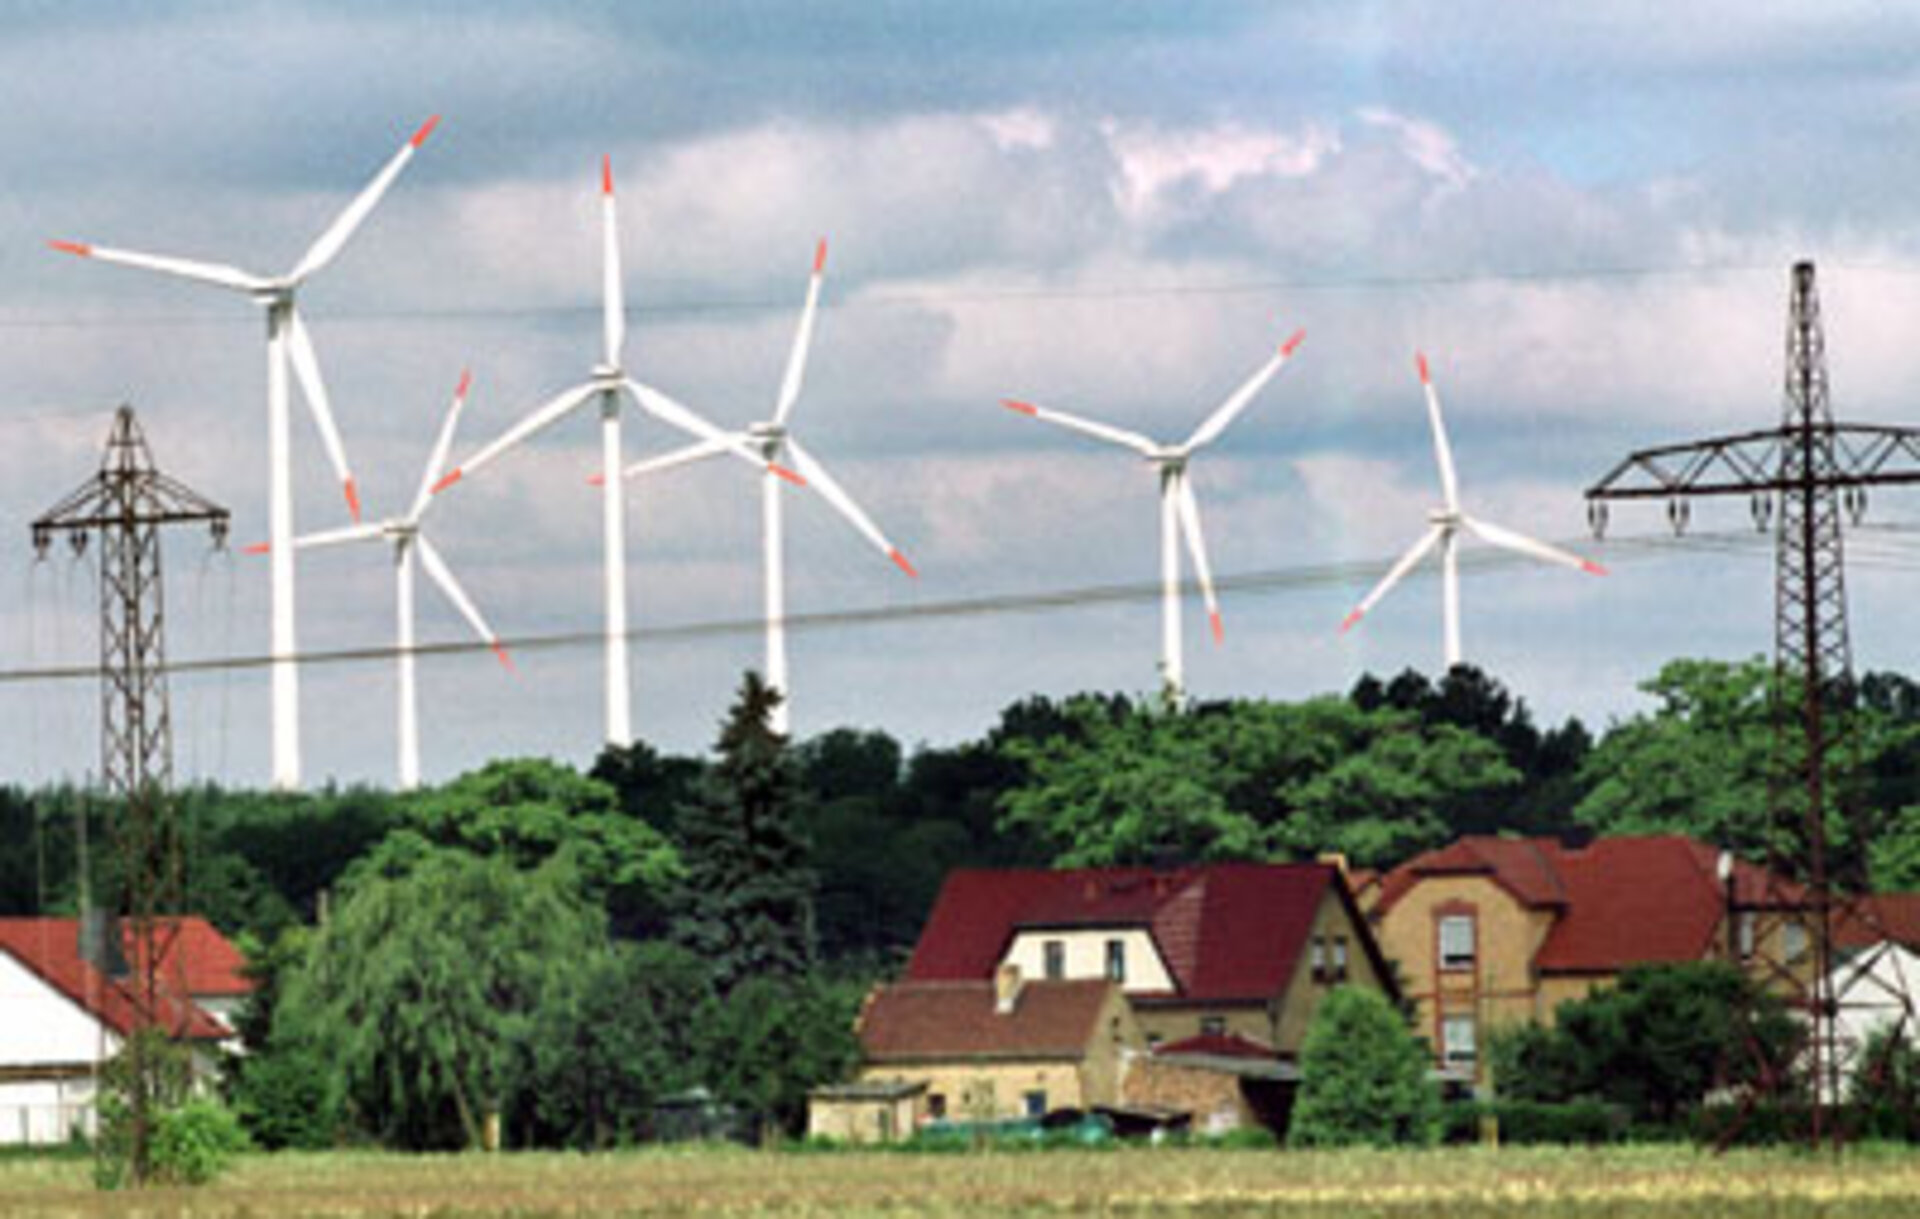 A wind power plant